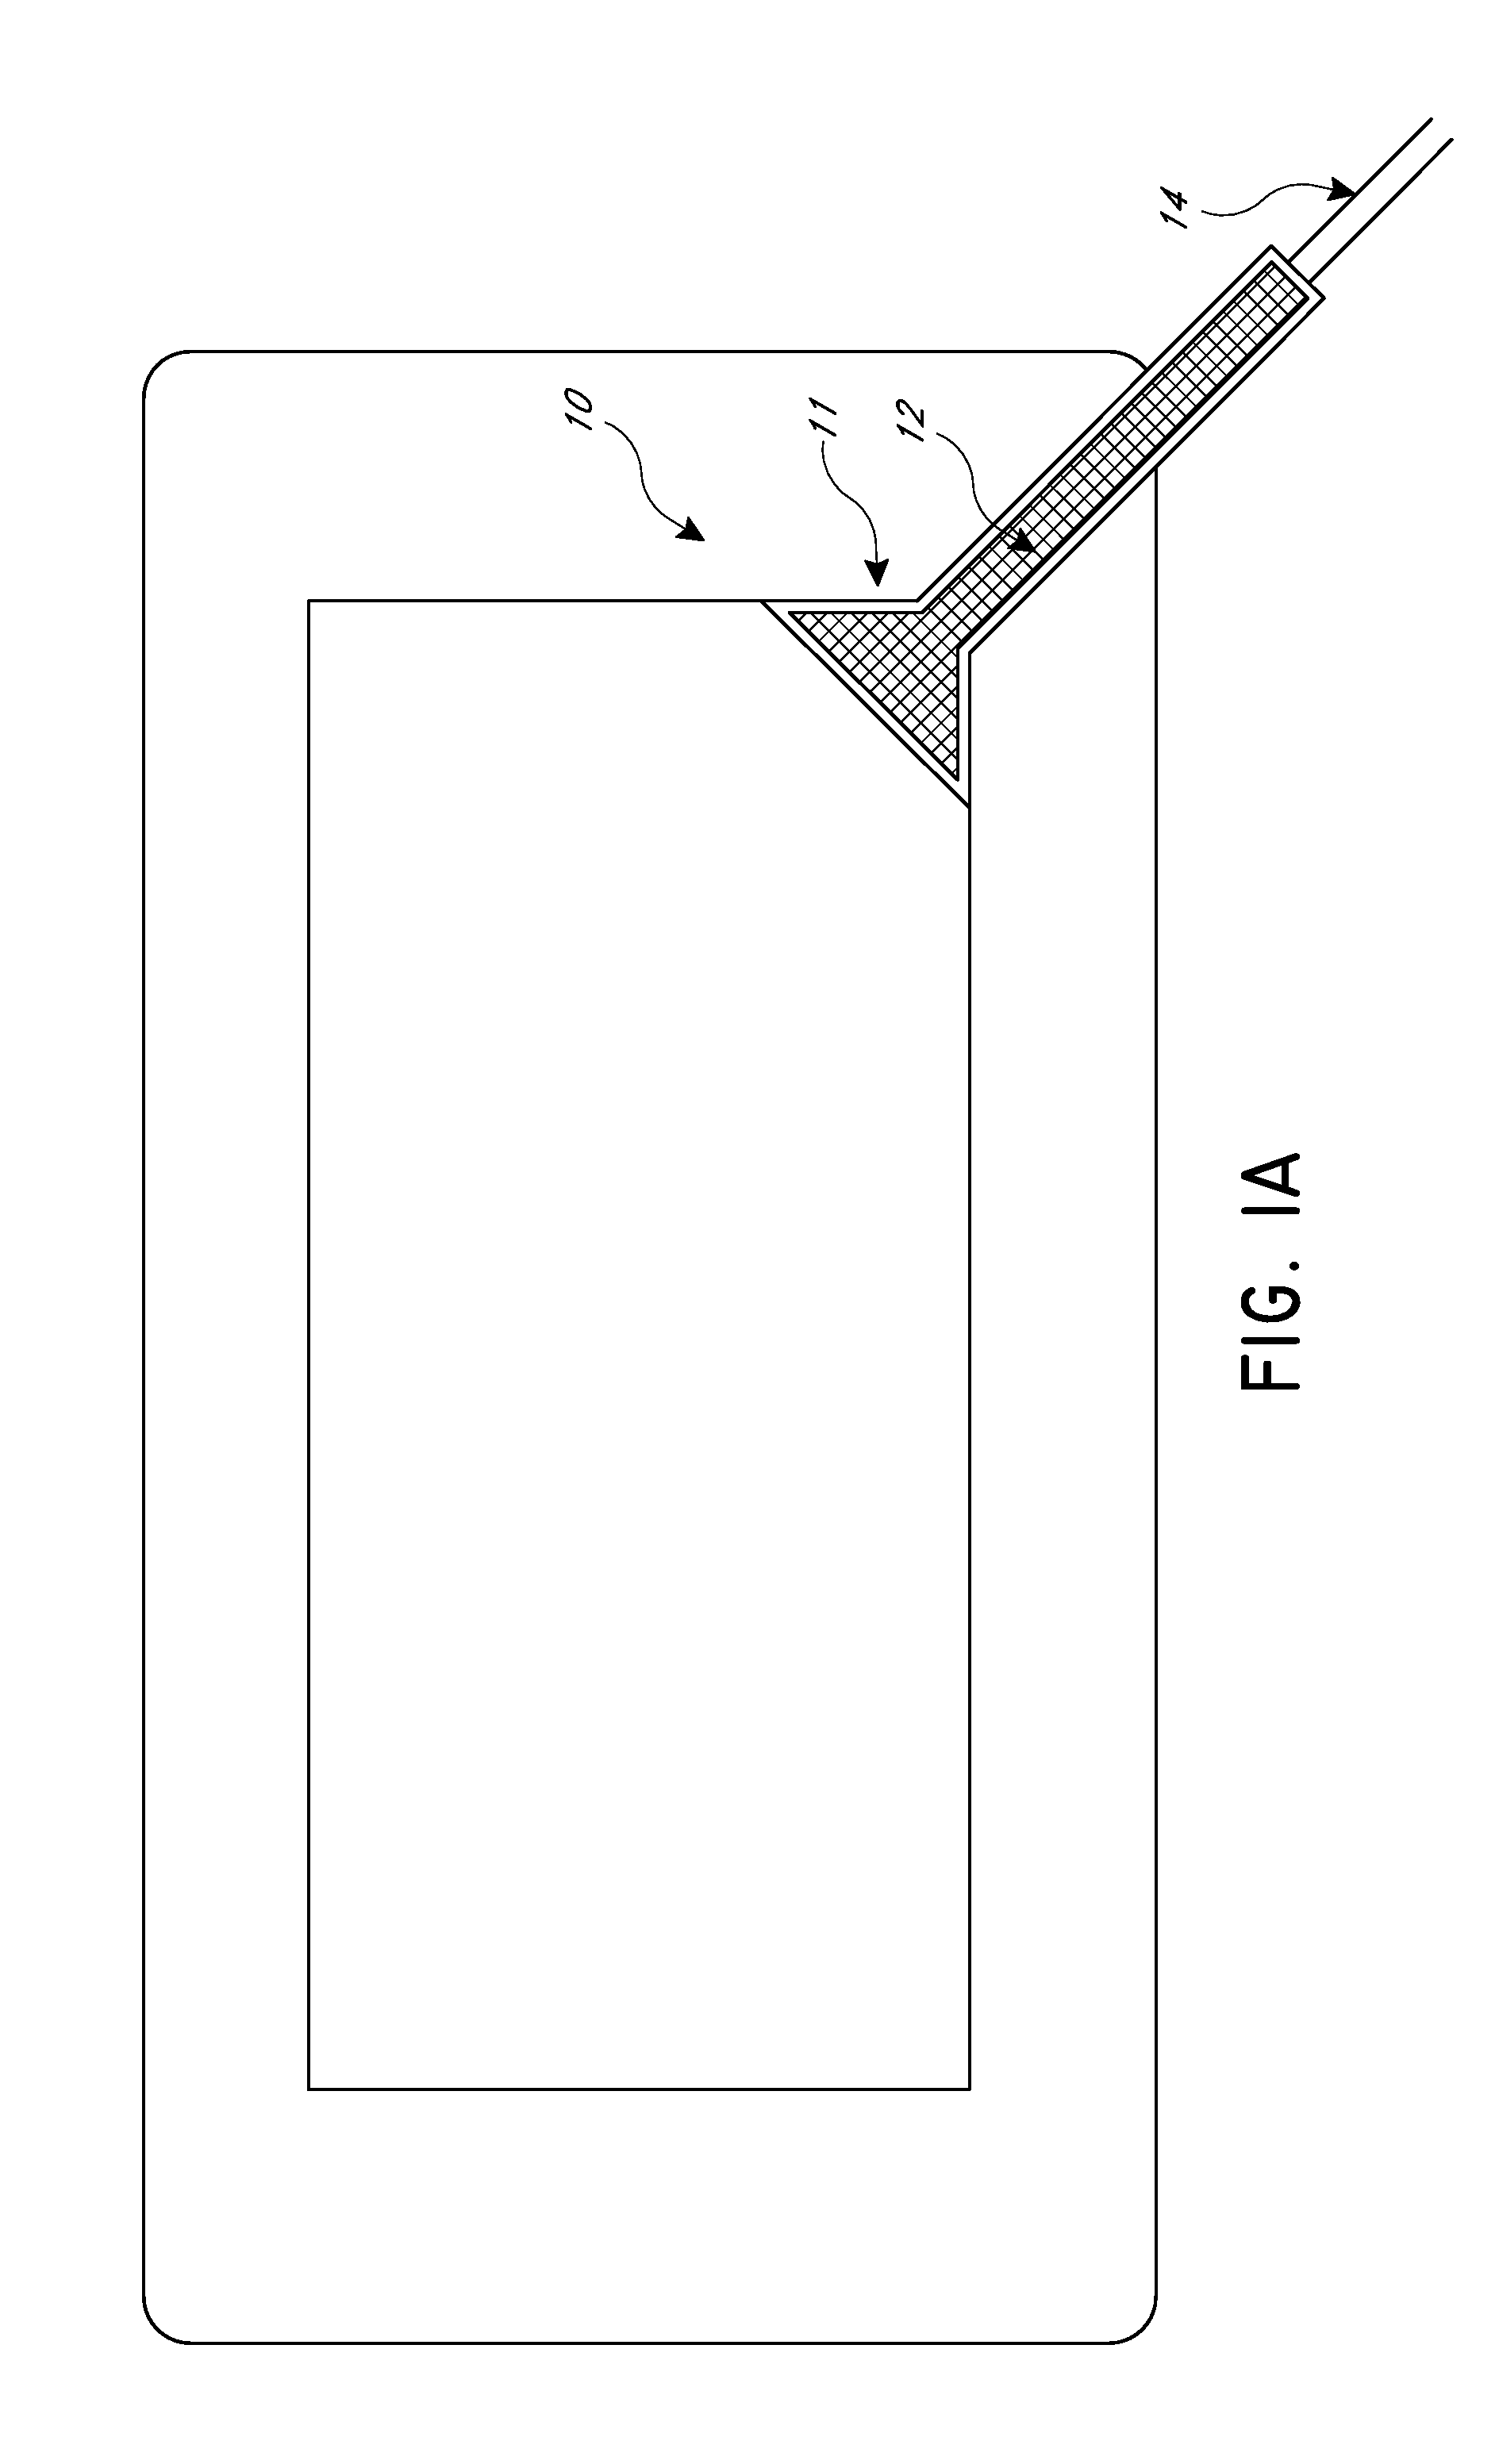 Apparatuses and methods for negative pressure wound therapy